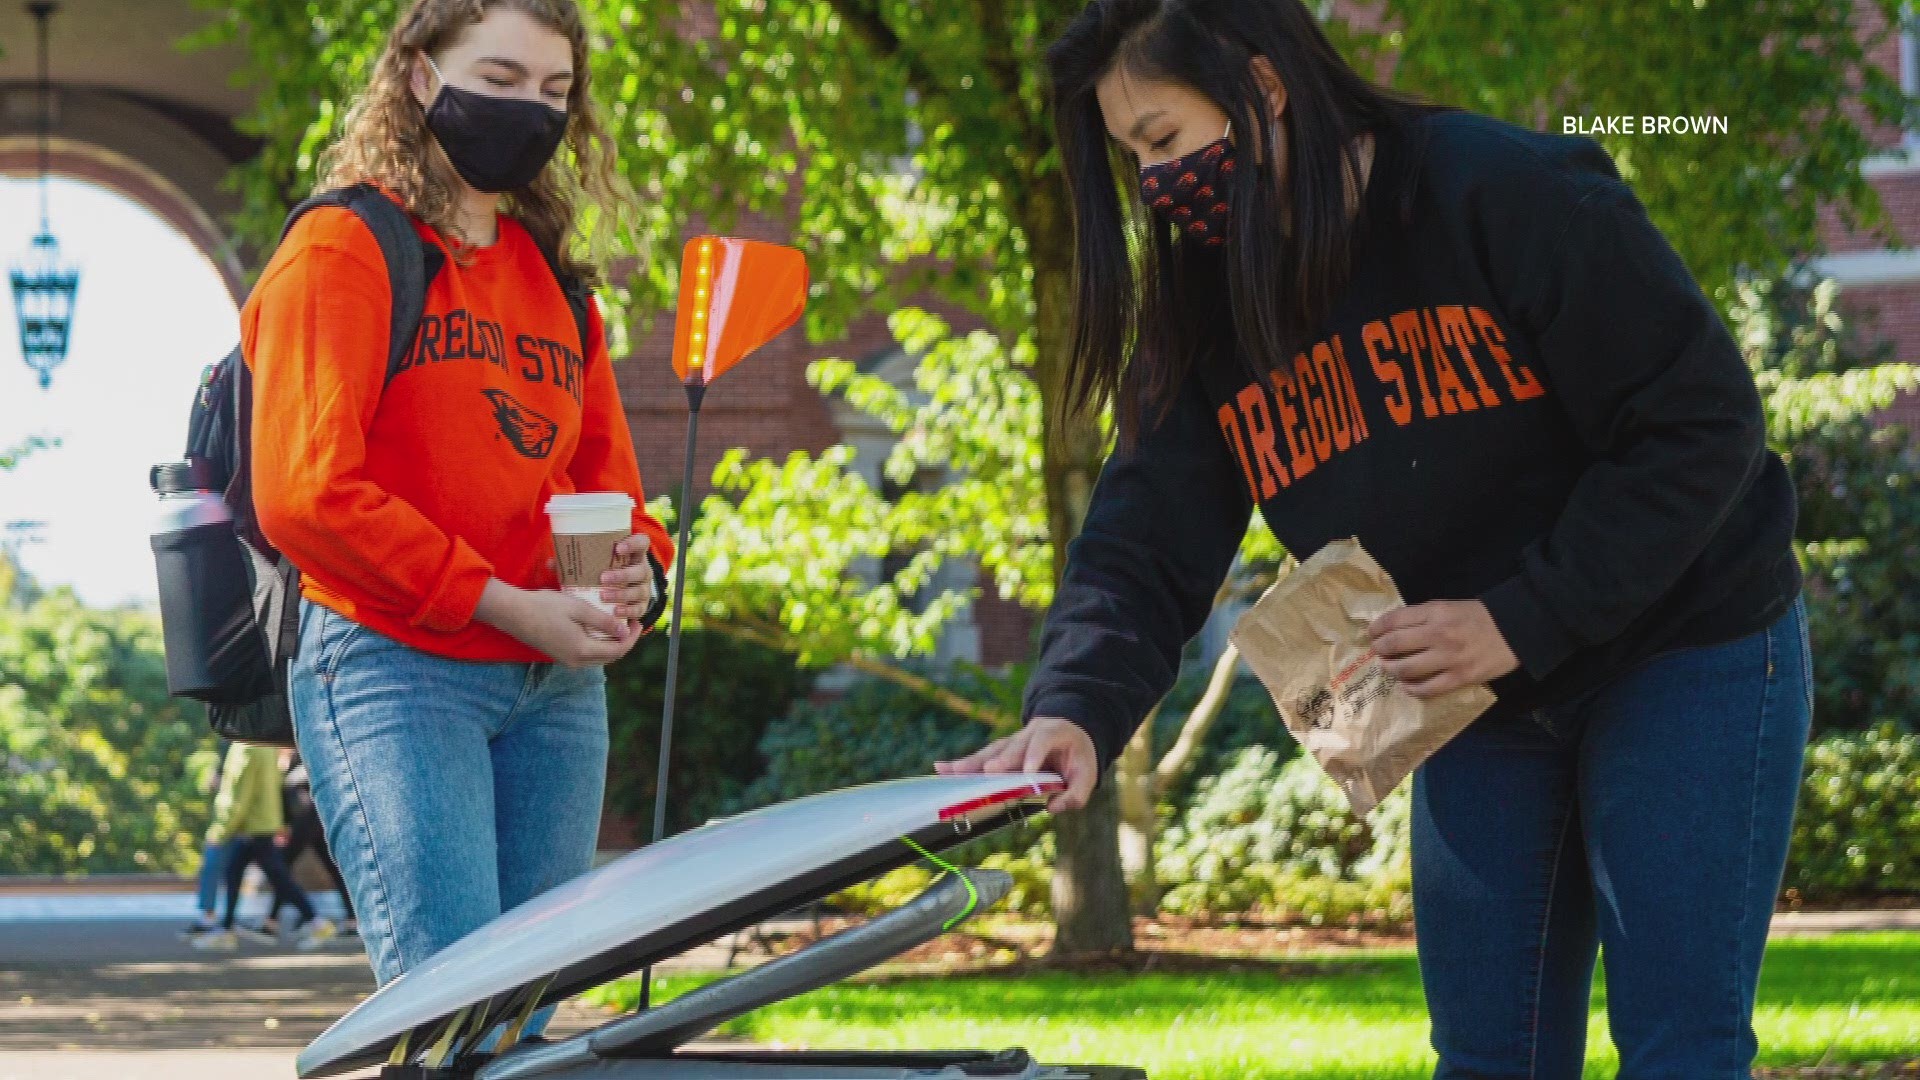 In partnership with Starship Technologies, OSU has a fleet of 20 robots that provide contactless food delivery to students and staff on campus.